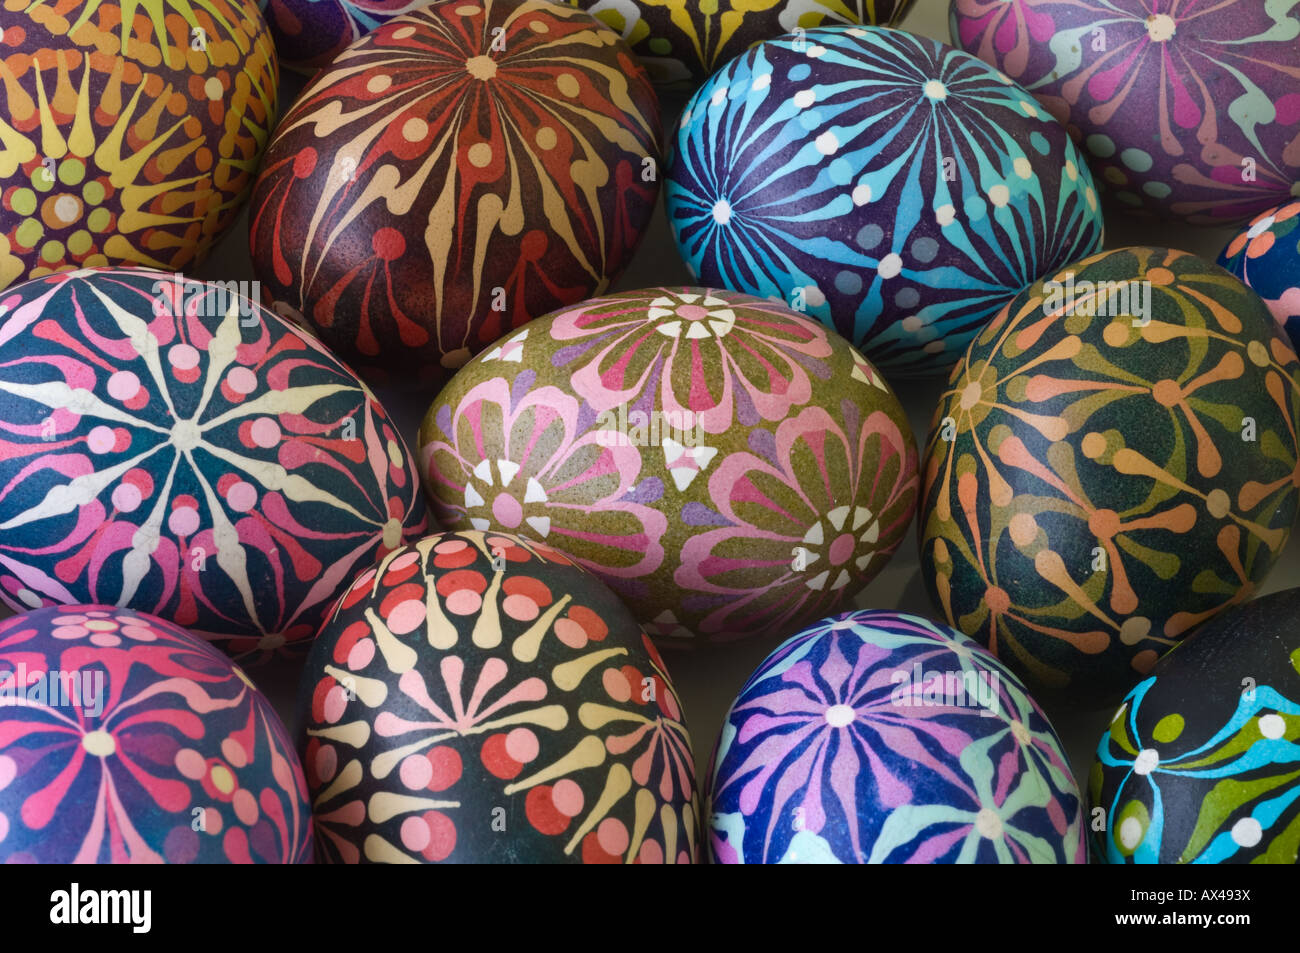 Collection of Easter Eggs (pisanki) decorated using batik method by Krystyna Majewska from Gdansk, Poland Stock Photo